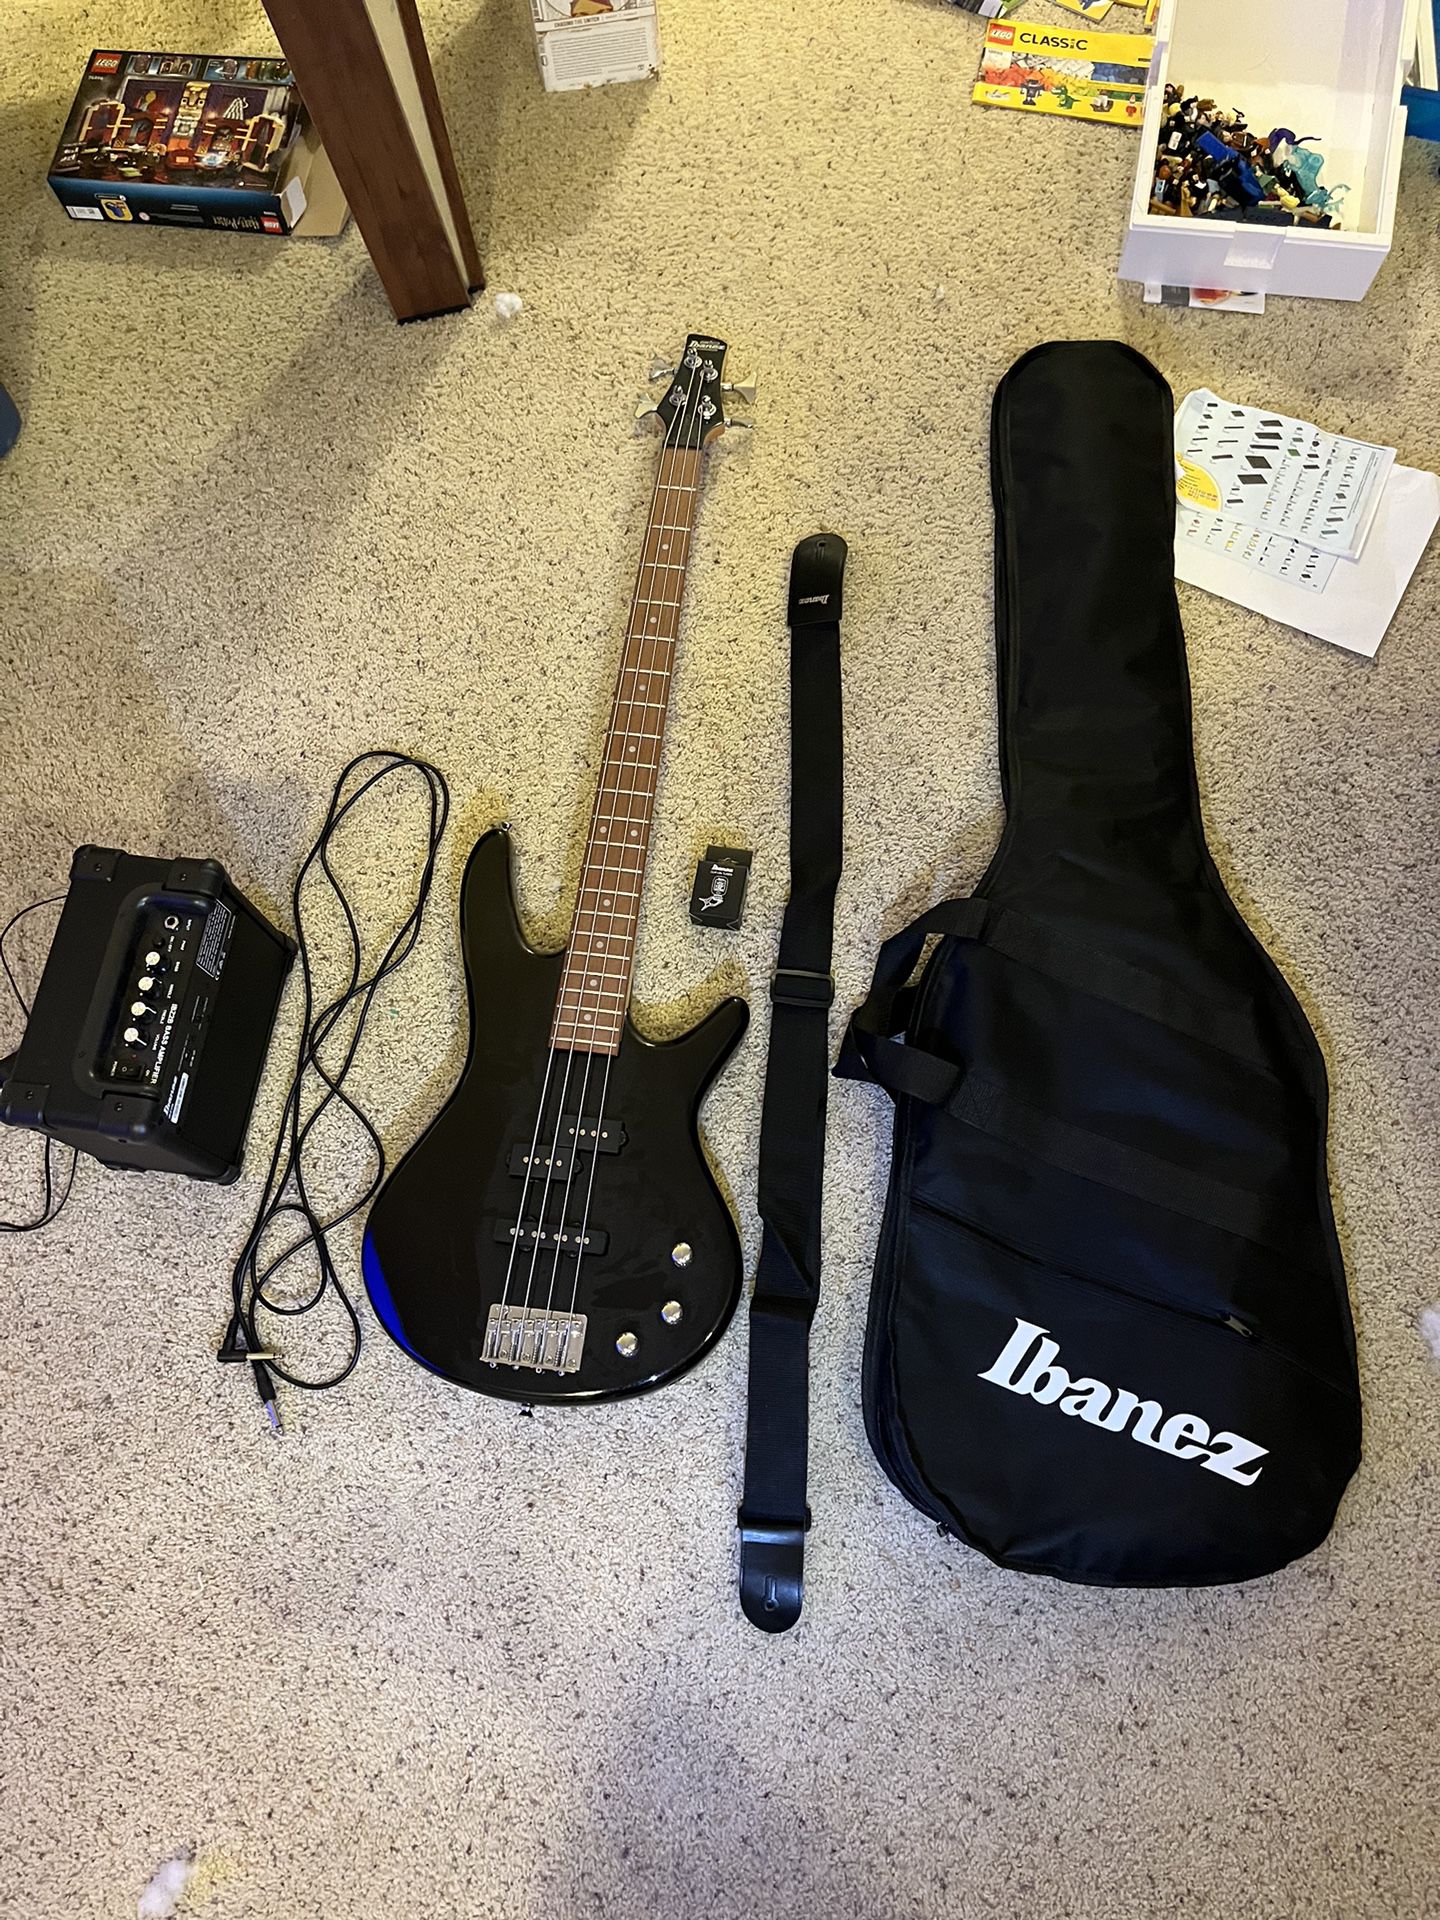 Ibanez Electric Guitar and Amp